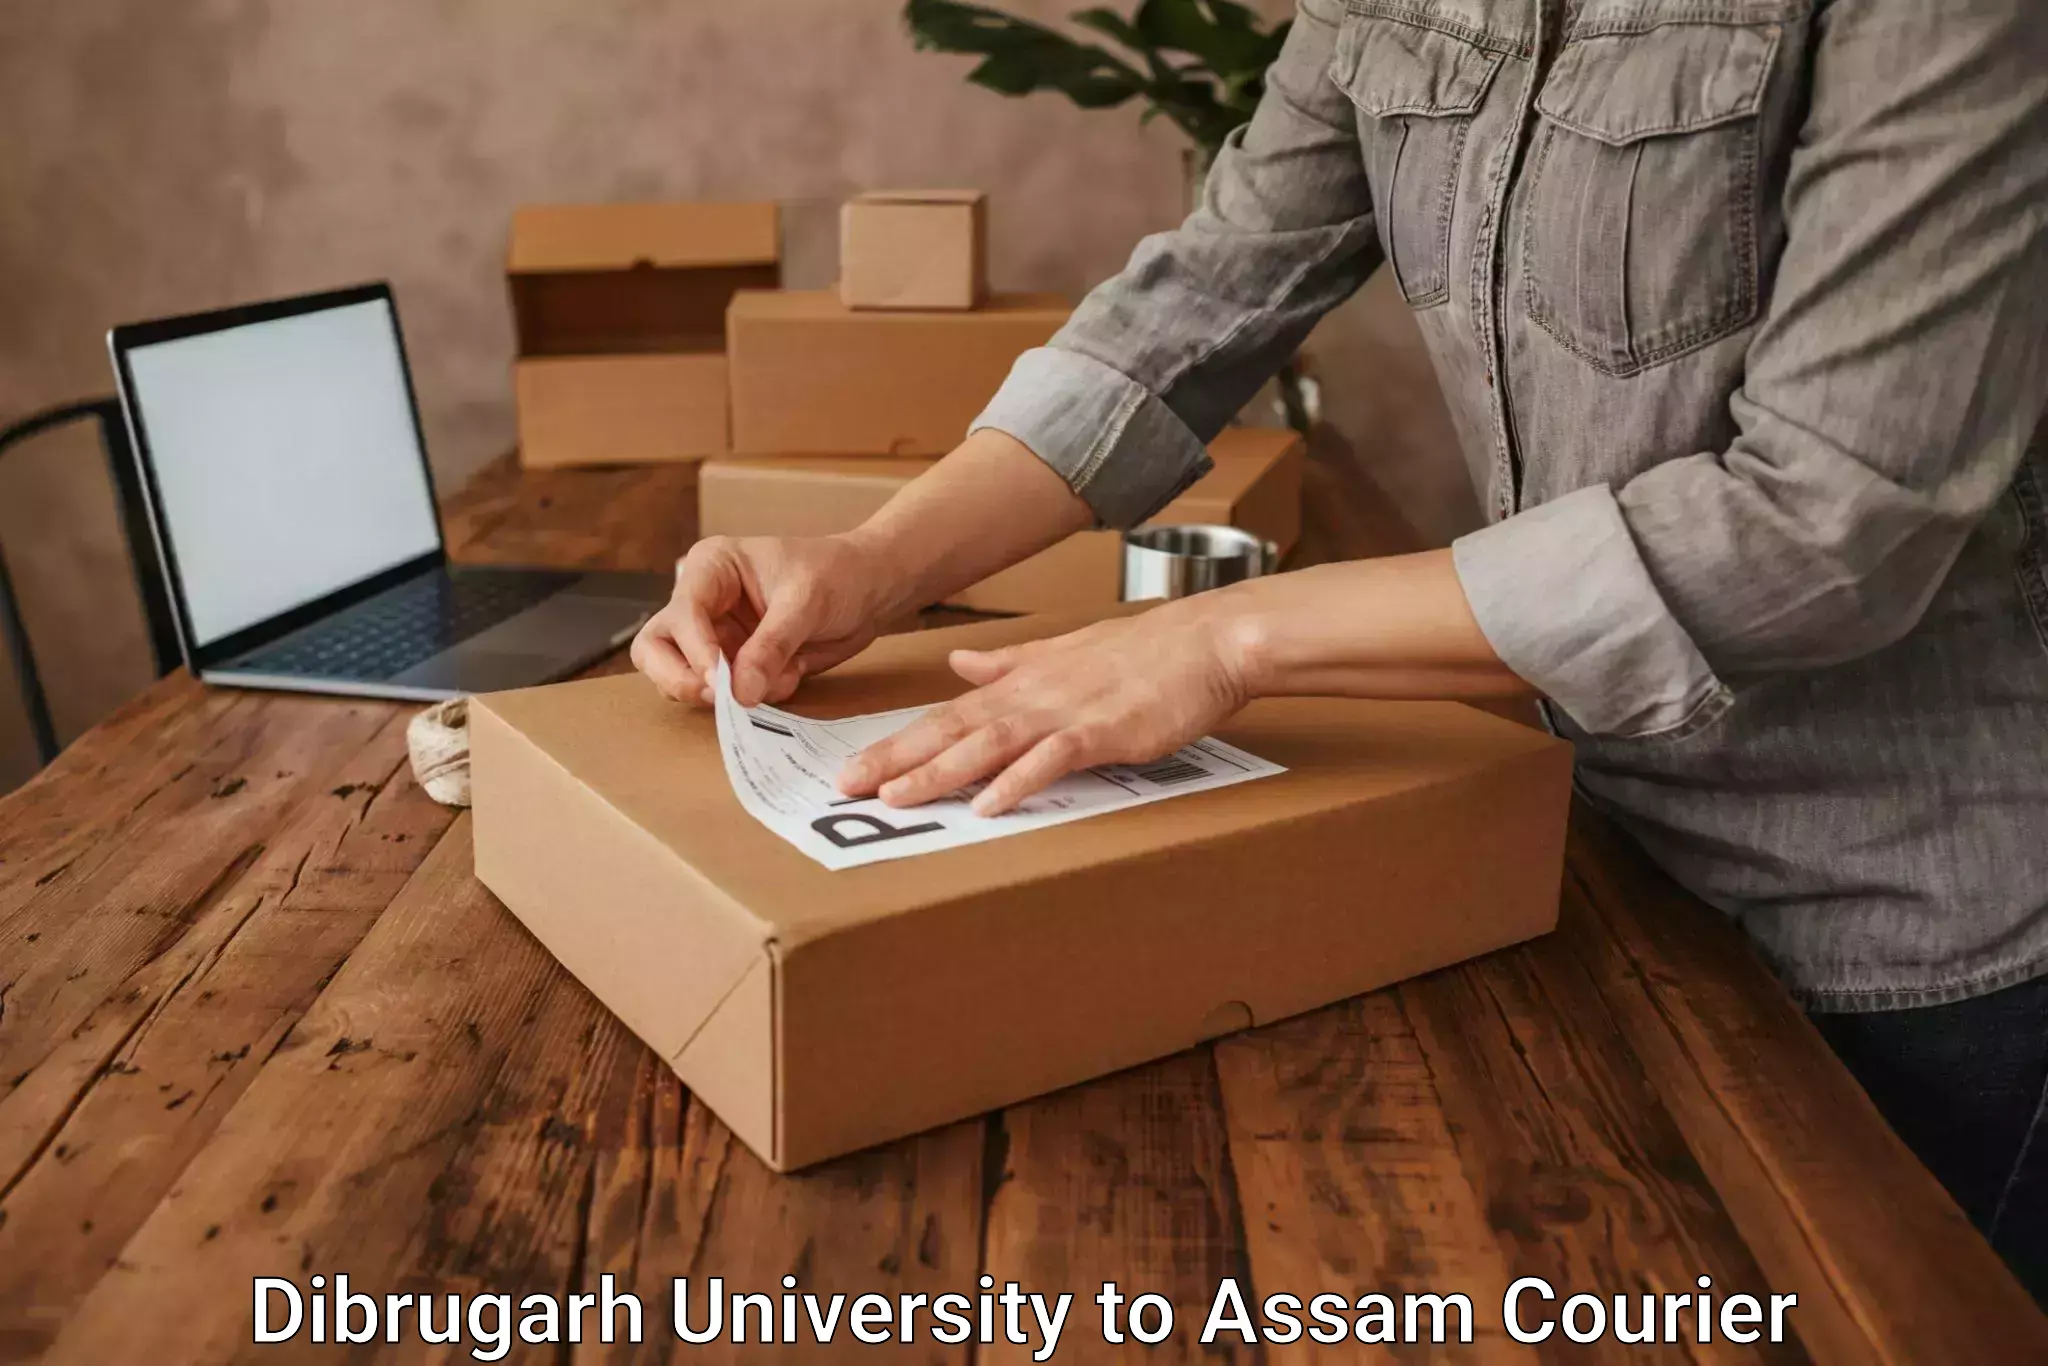 Quality courier services Dibrugarh University to Tezpur University